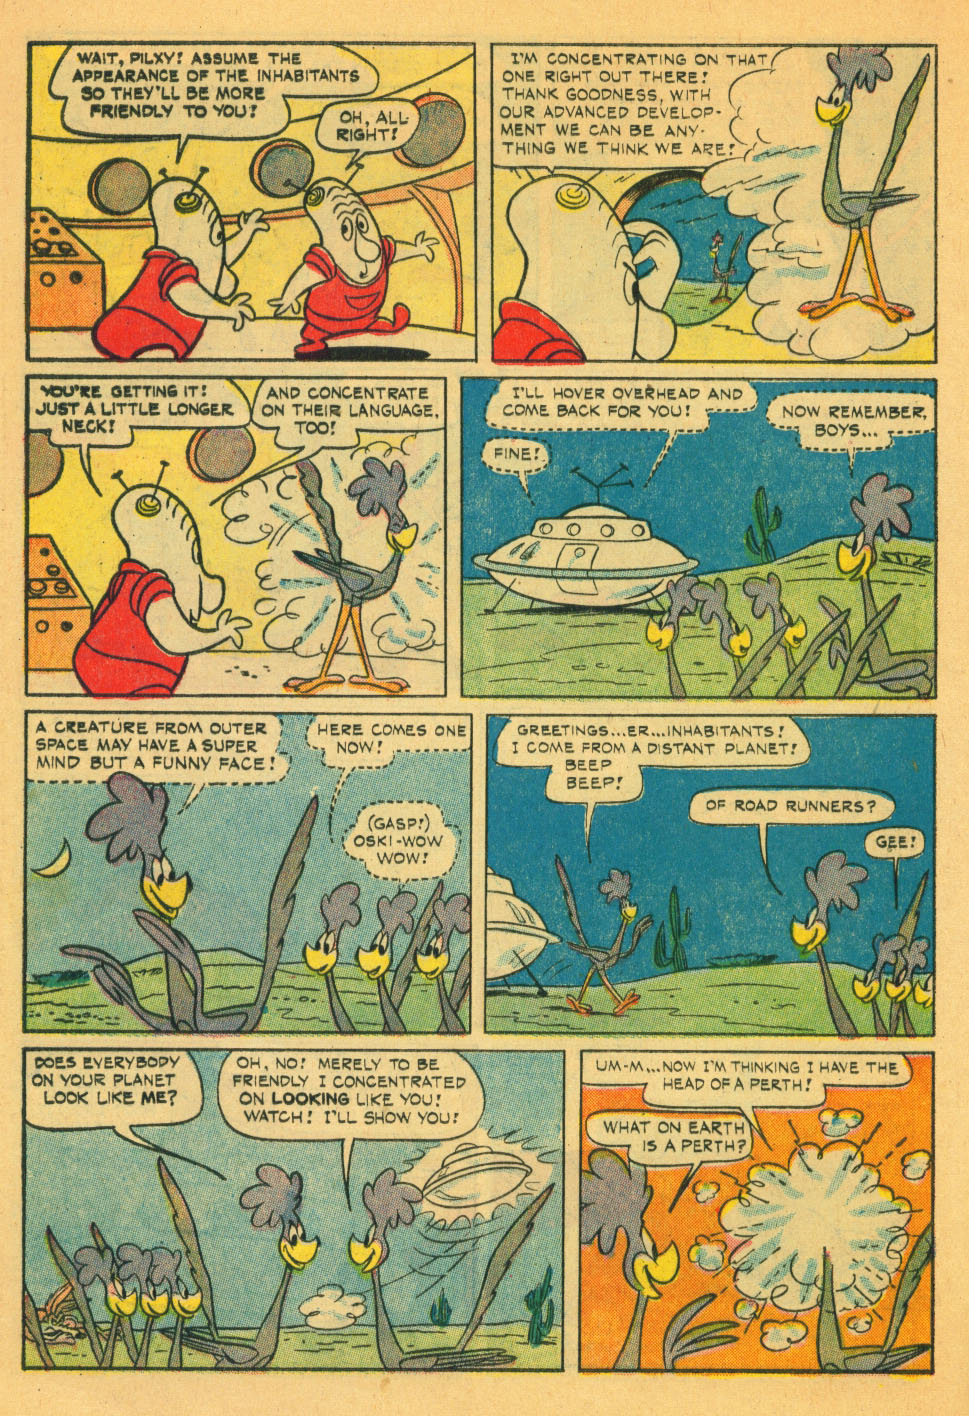 Read online Beep Beep The Road Runner comic -  Issue #9 - 12